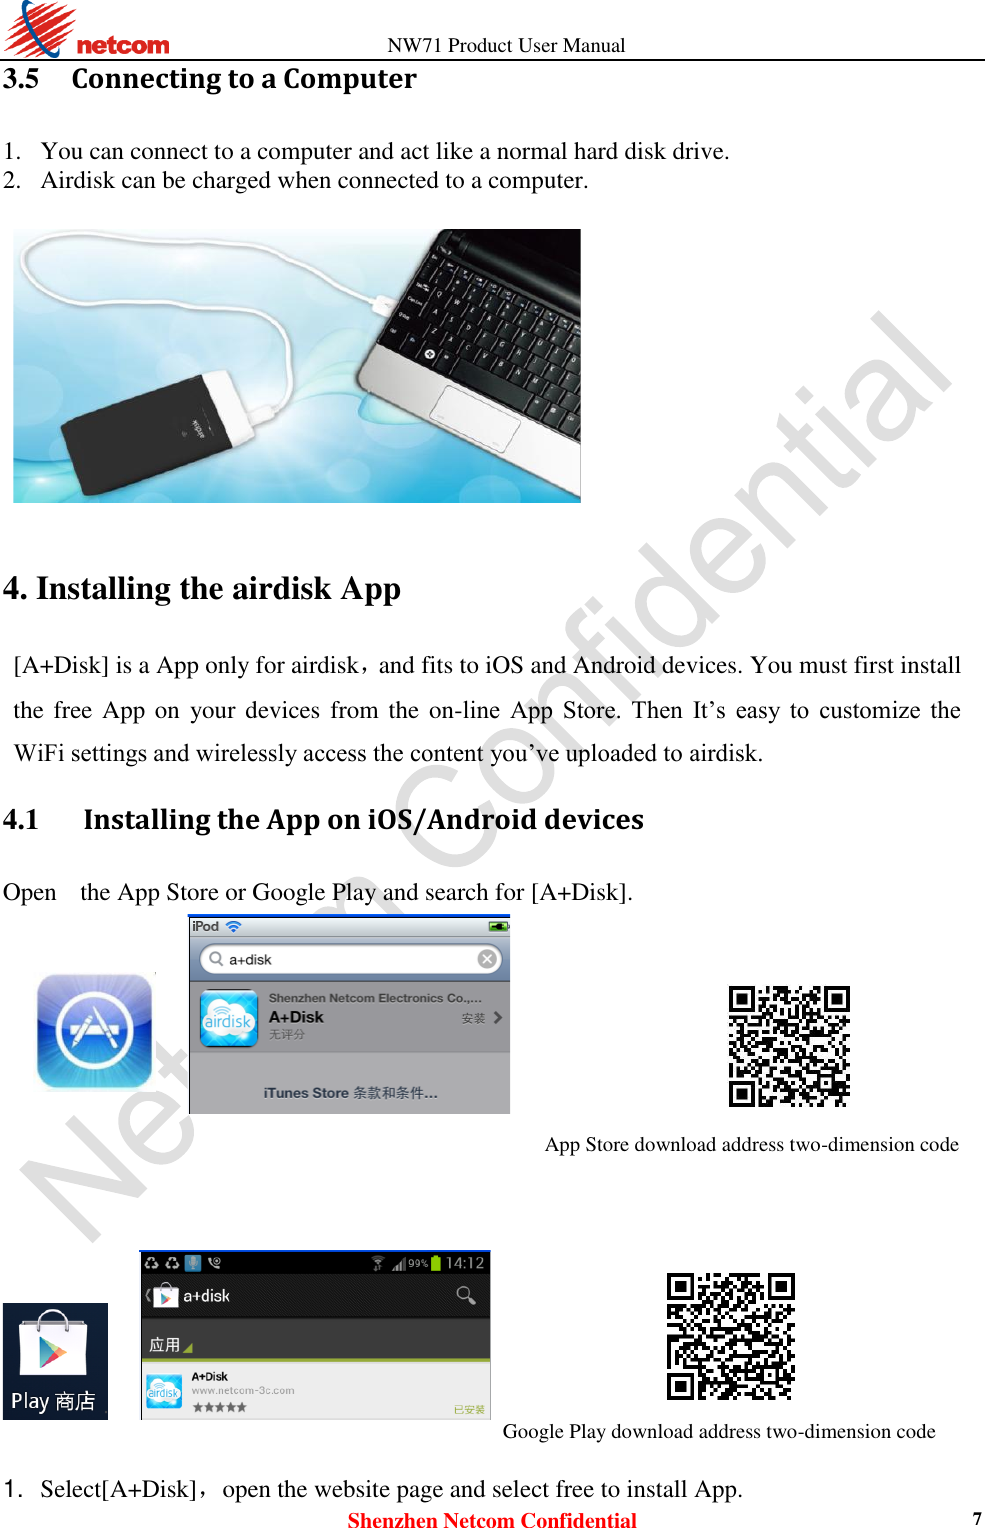                   NW71 Product User Manual Shenzhen Netcom Confidential 7 3.5     Connecting to a Computer 1. You can connect to a computer and act like a normal hard disk drive.   2. Airdisk can be charged when connected to a computer.    4. Installing the airdisk App [A+Disk] is a App only for airdisk，and fits to iOS and Android devices. You must first install the free App  on  your devices from the on-line  App  Store.  Then  It’s  easy  to  customize  the WiFi settings and wirelessly access the content you’ve uploaded to airdisk. 4.1      Installing the App on iOS/Android devices Open   the App Store or Google Play and search for [A+Disk].  App Store download address two-dimension code                          Google Play download address two-dimension code   1. Select[A+Disk]，open the website page and select free to install App.    